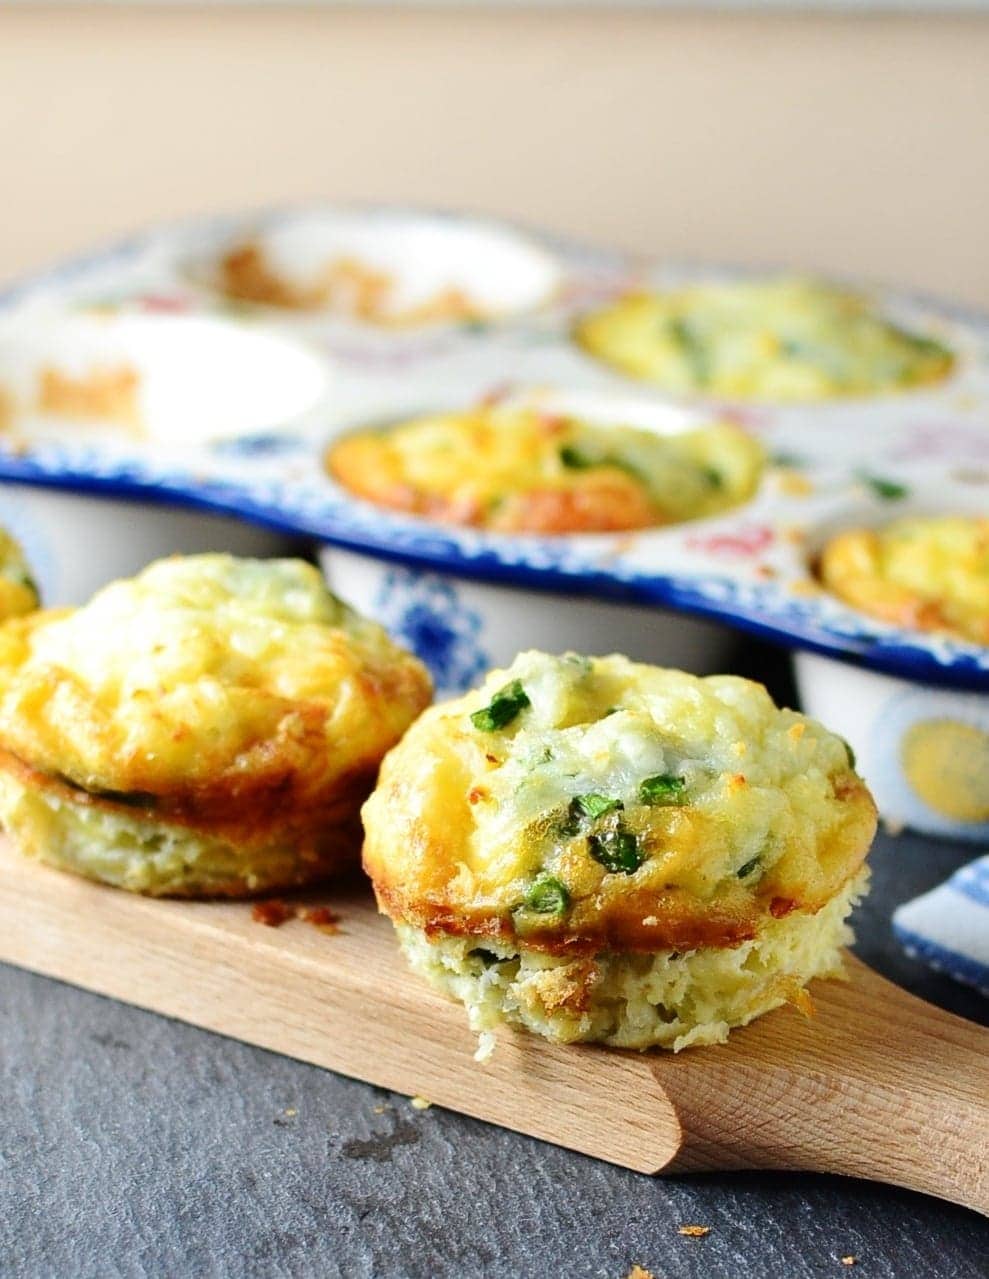 Potato asparagus frittata muffins on wooden board with ceramic muffin tin in background on dark grey surface.